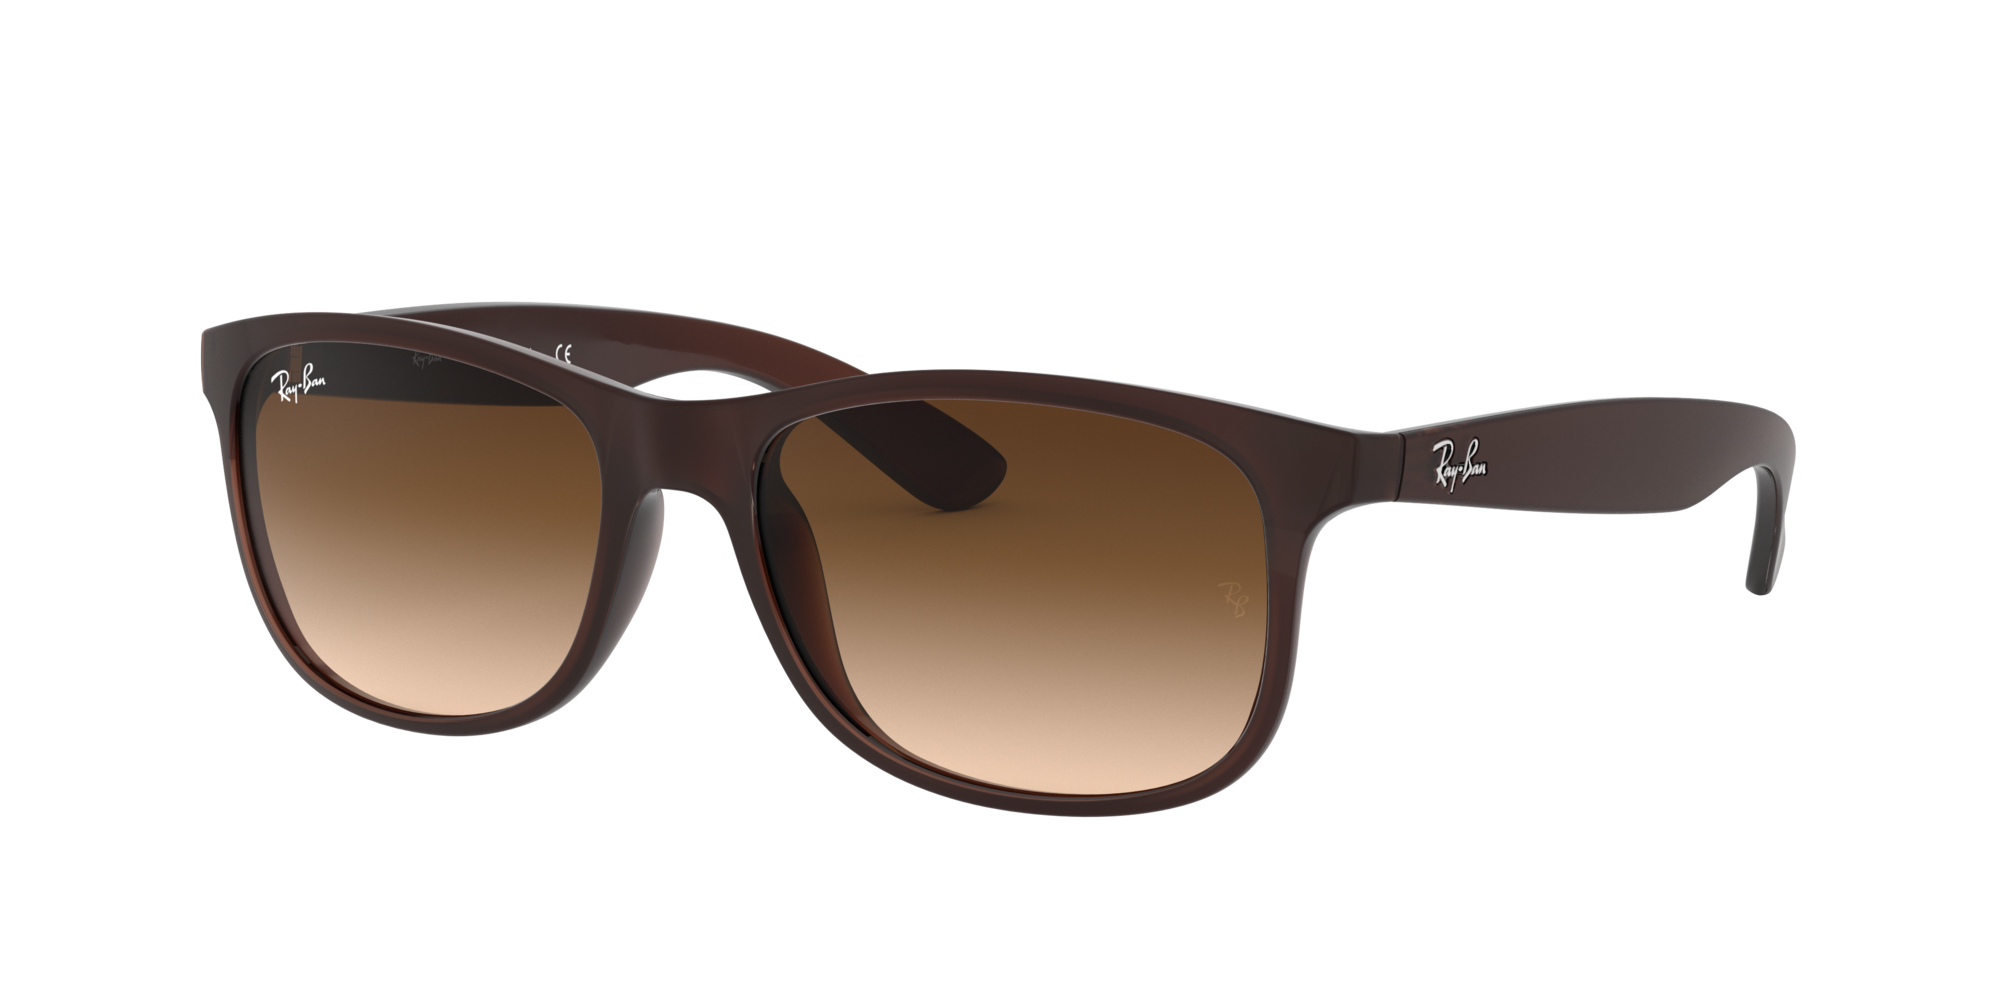 Ray-Ban Sonnenbrille Andy im Angebot RB4202 607313